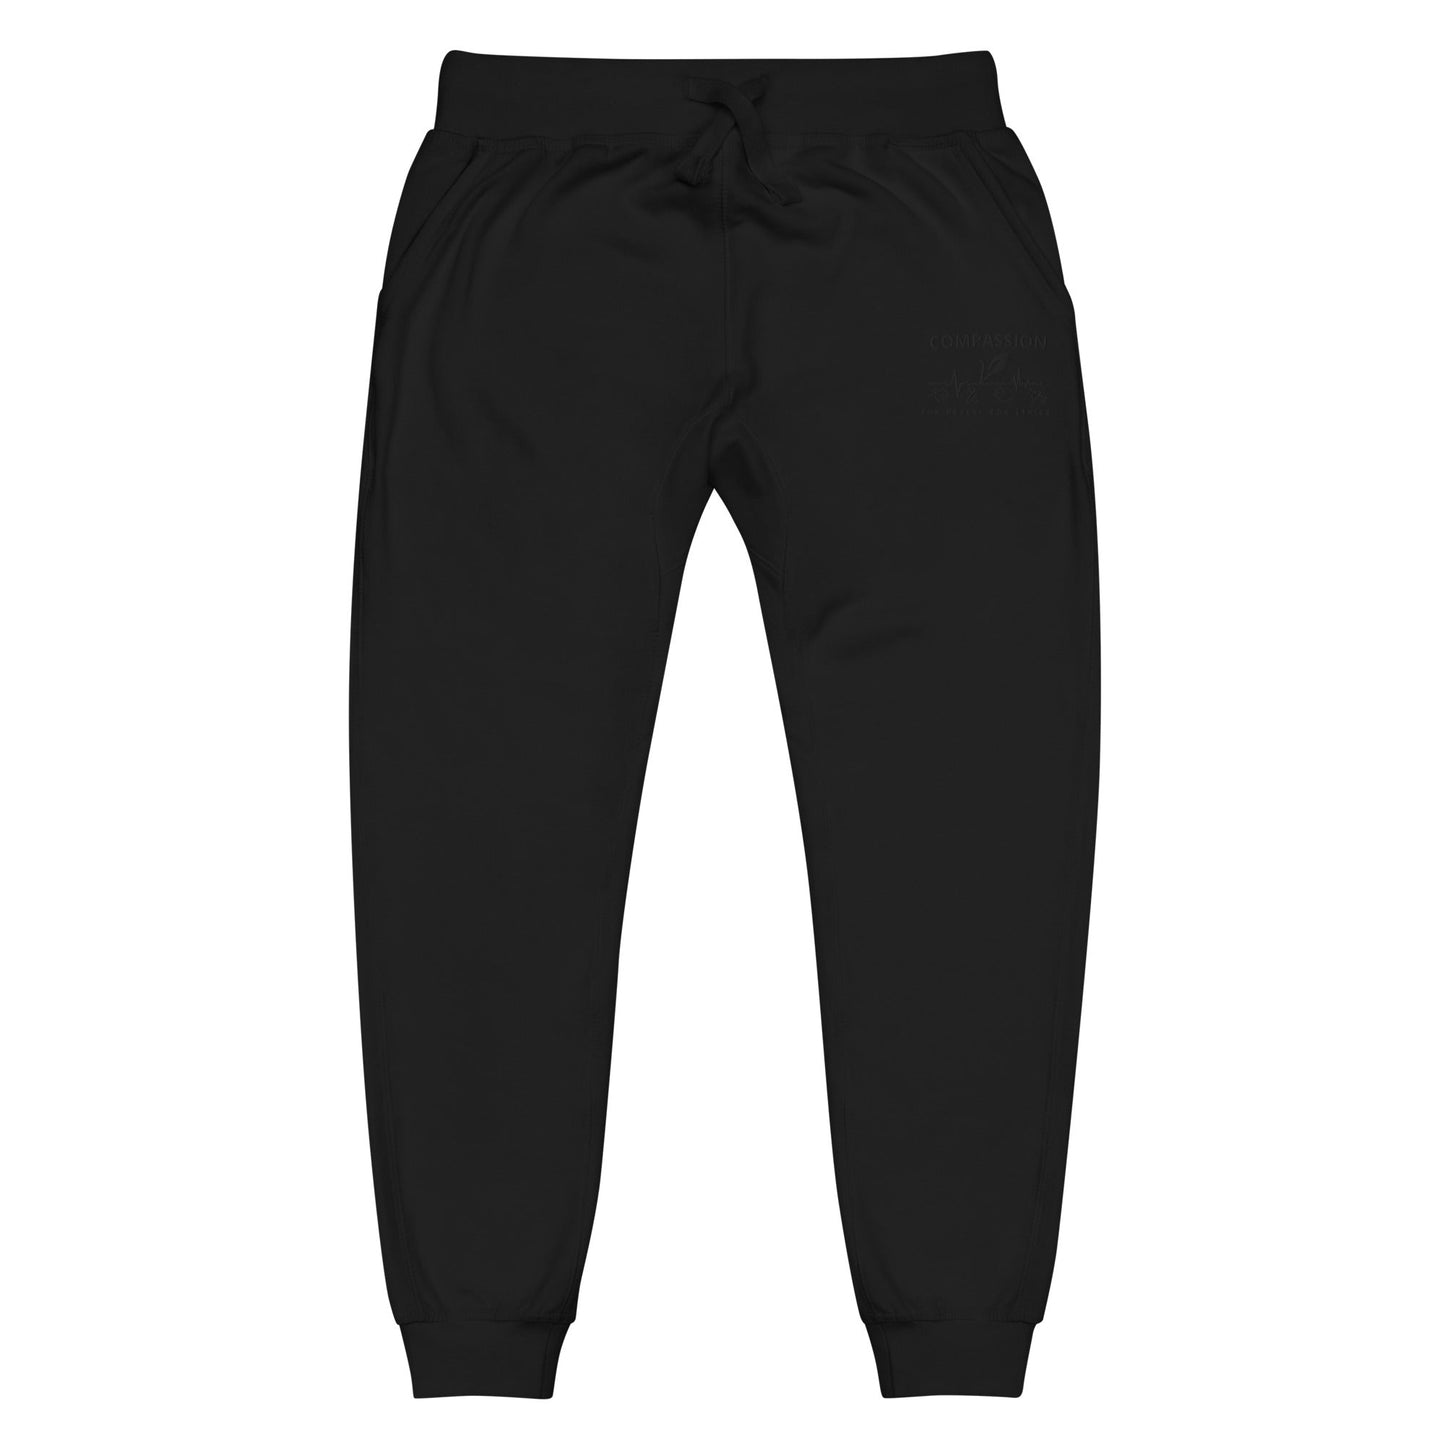 Compassion Fleece sweatpants - For Health For Ethics - Black Out